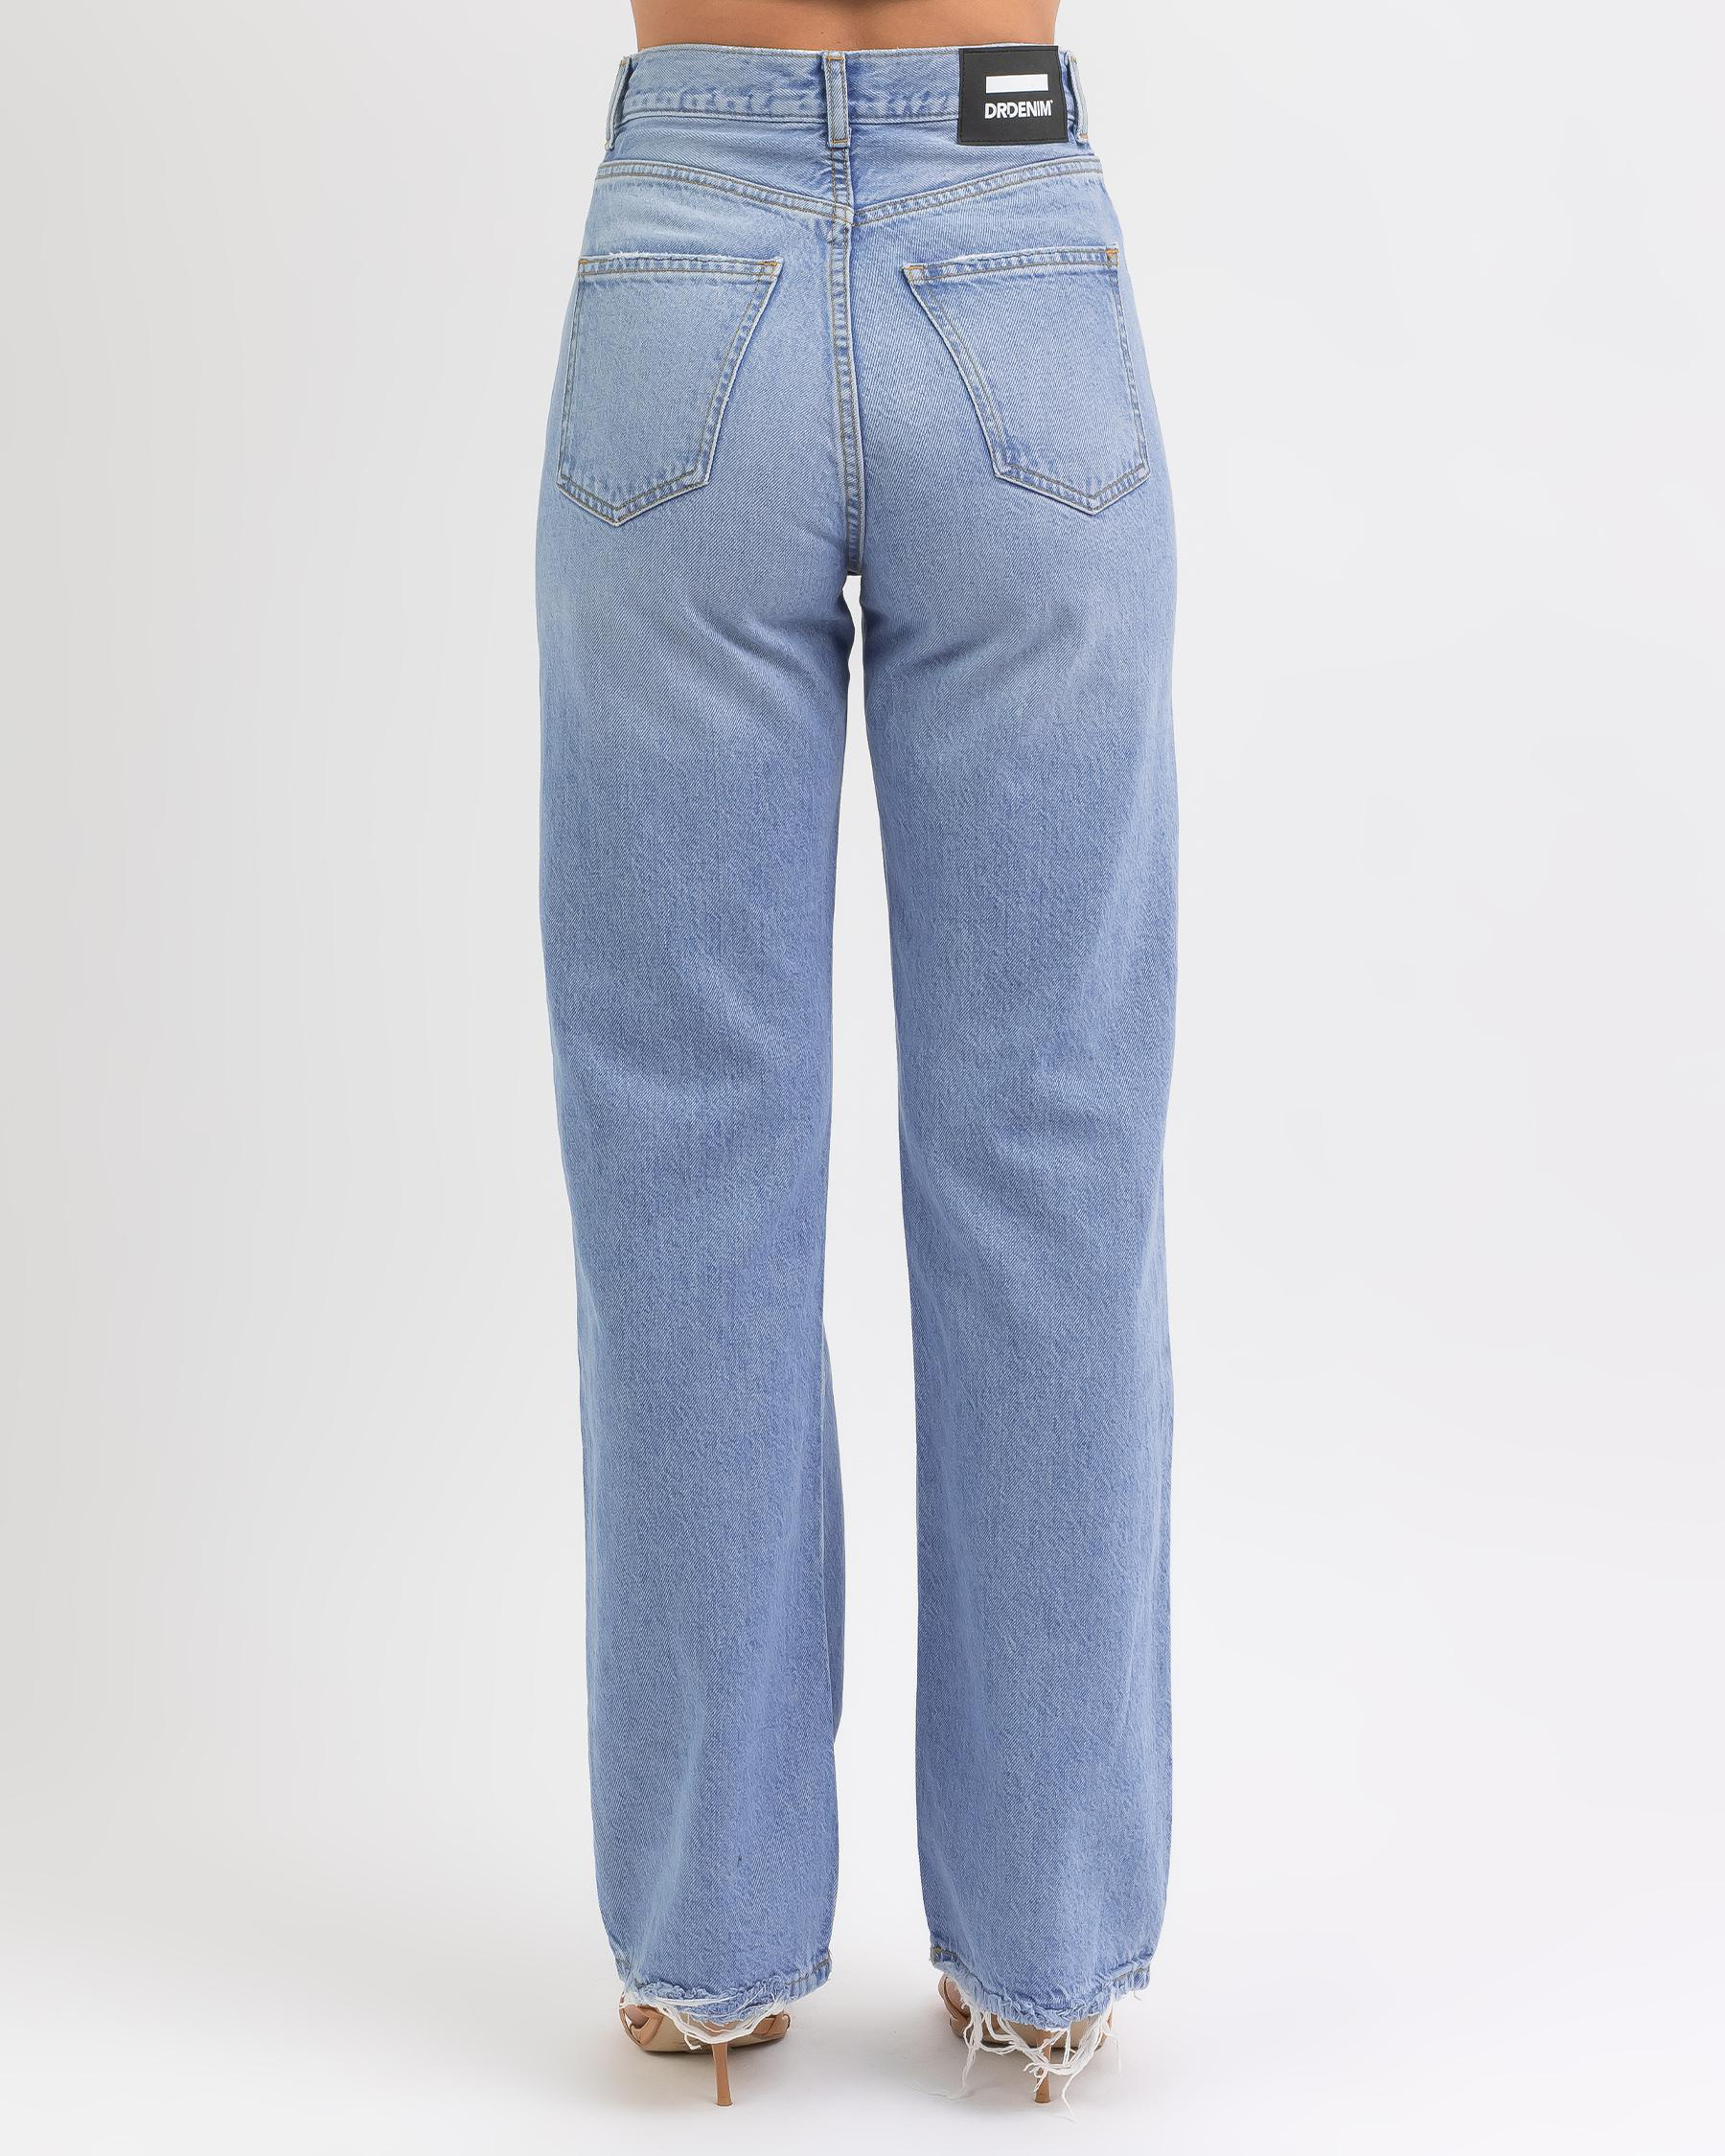 Dr Denim Echo Jeans In Empress Sky Blue Ripped - Fast Shipping & Easy ...